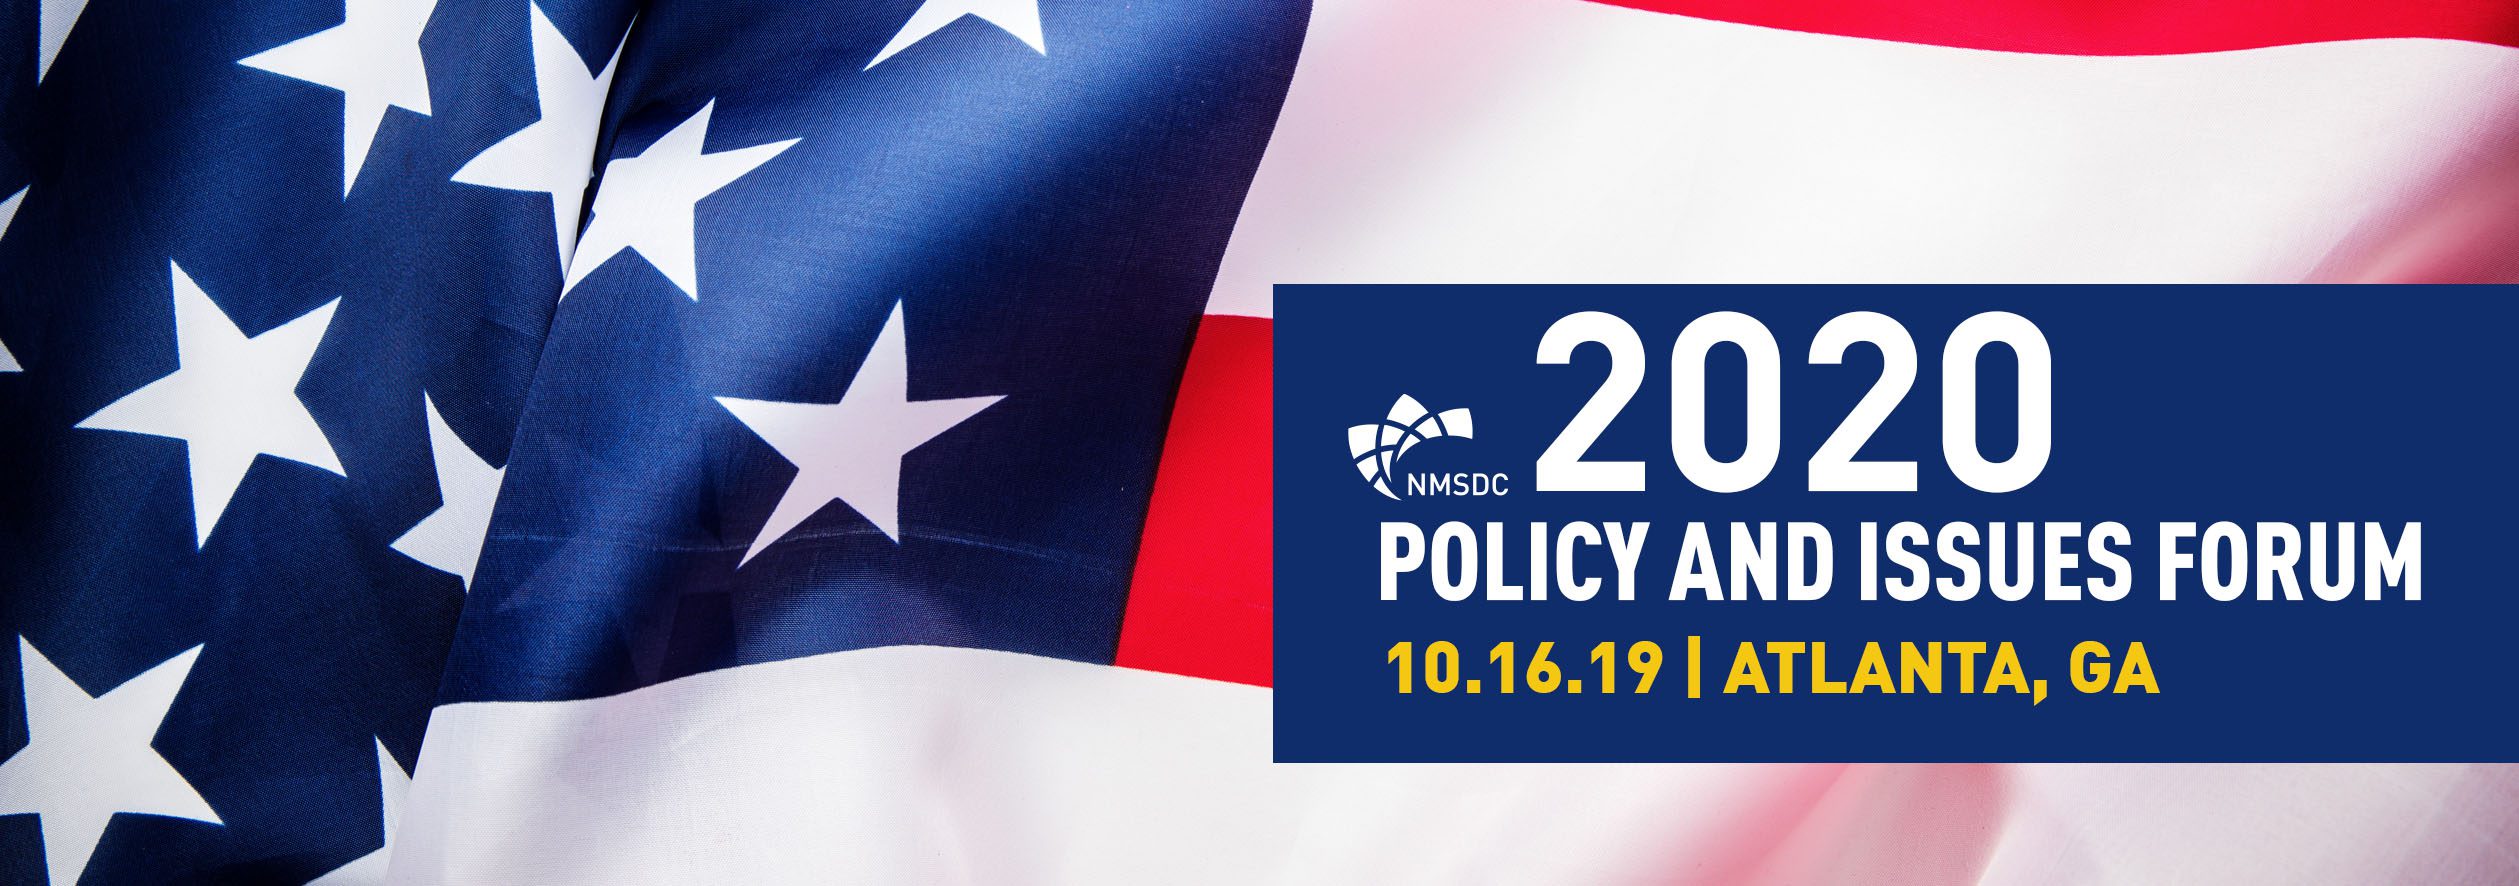 NMSDC 2020 Policy and Issues Forum